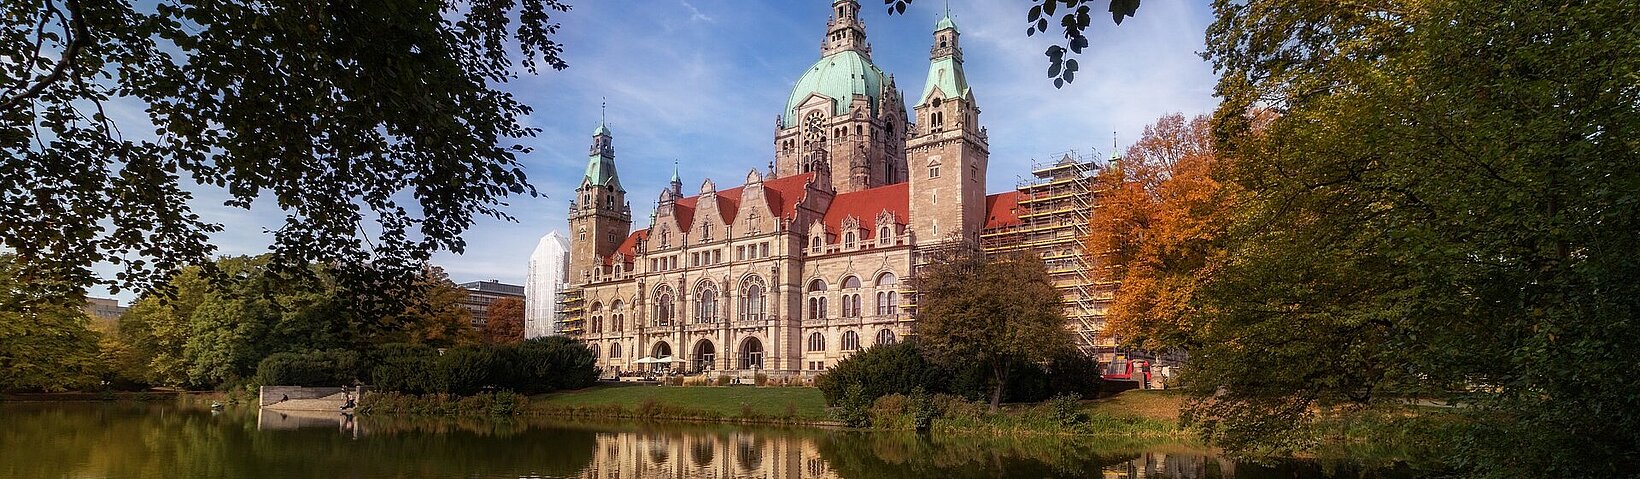 [Translate to English:] Neues Rathaus Hannover 